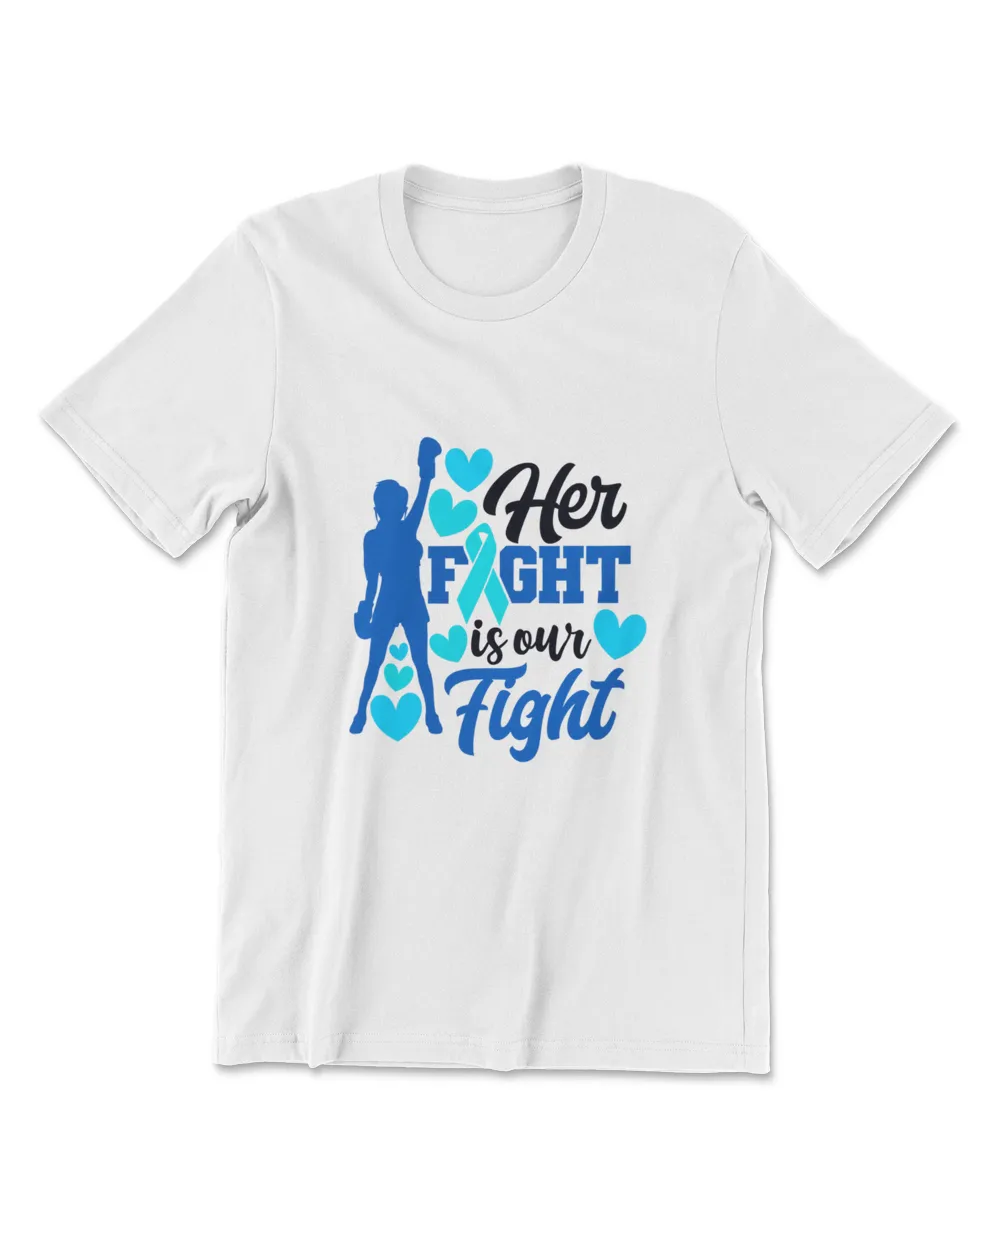 Her Fight Is Our Fight November Diabetes Awareness Month